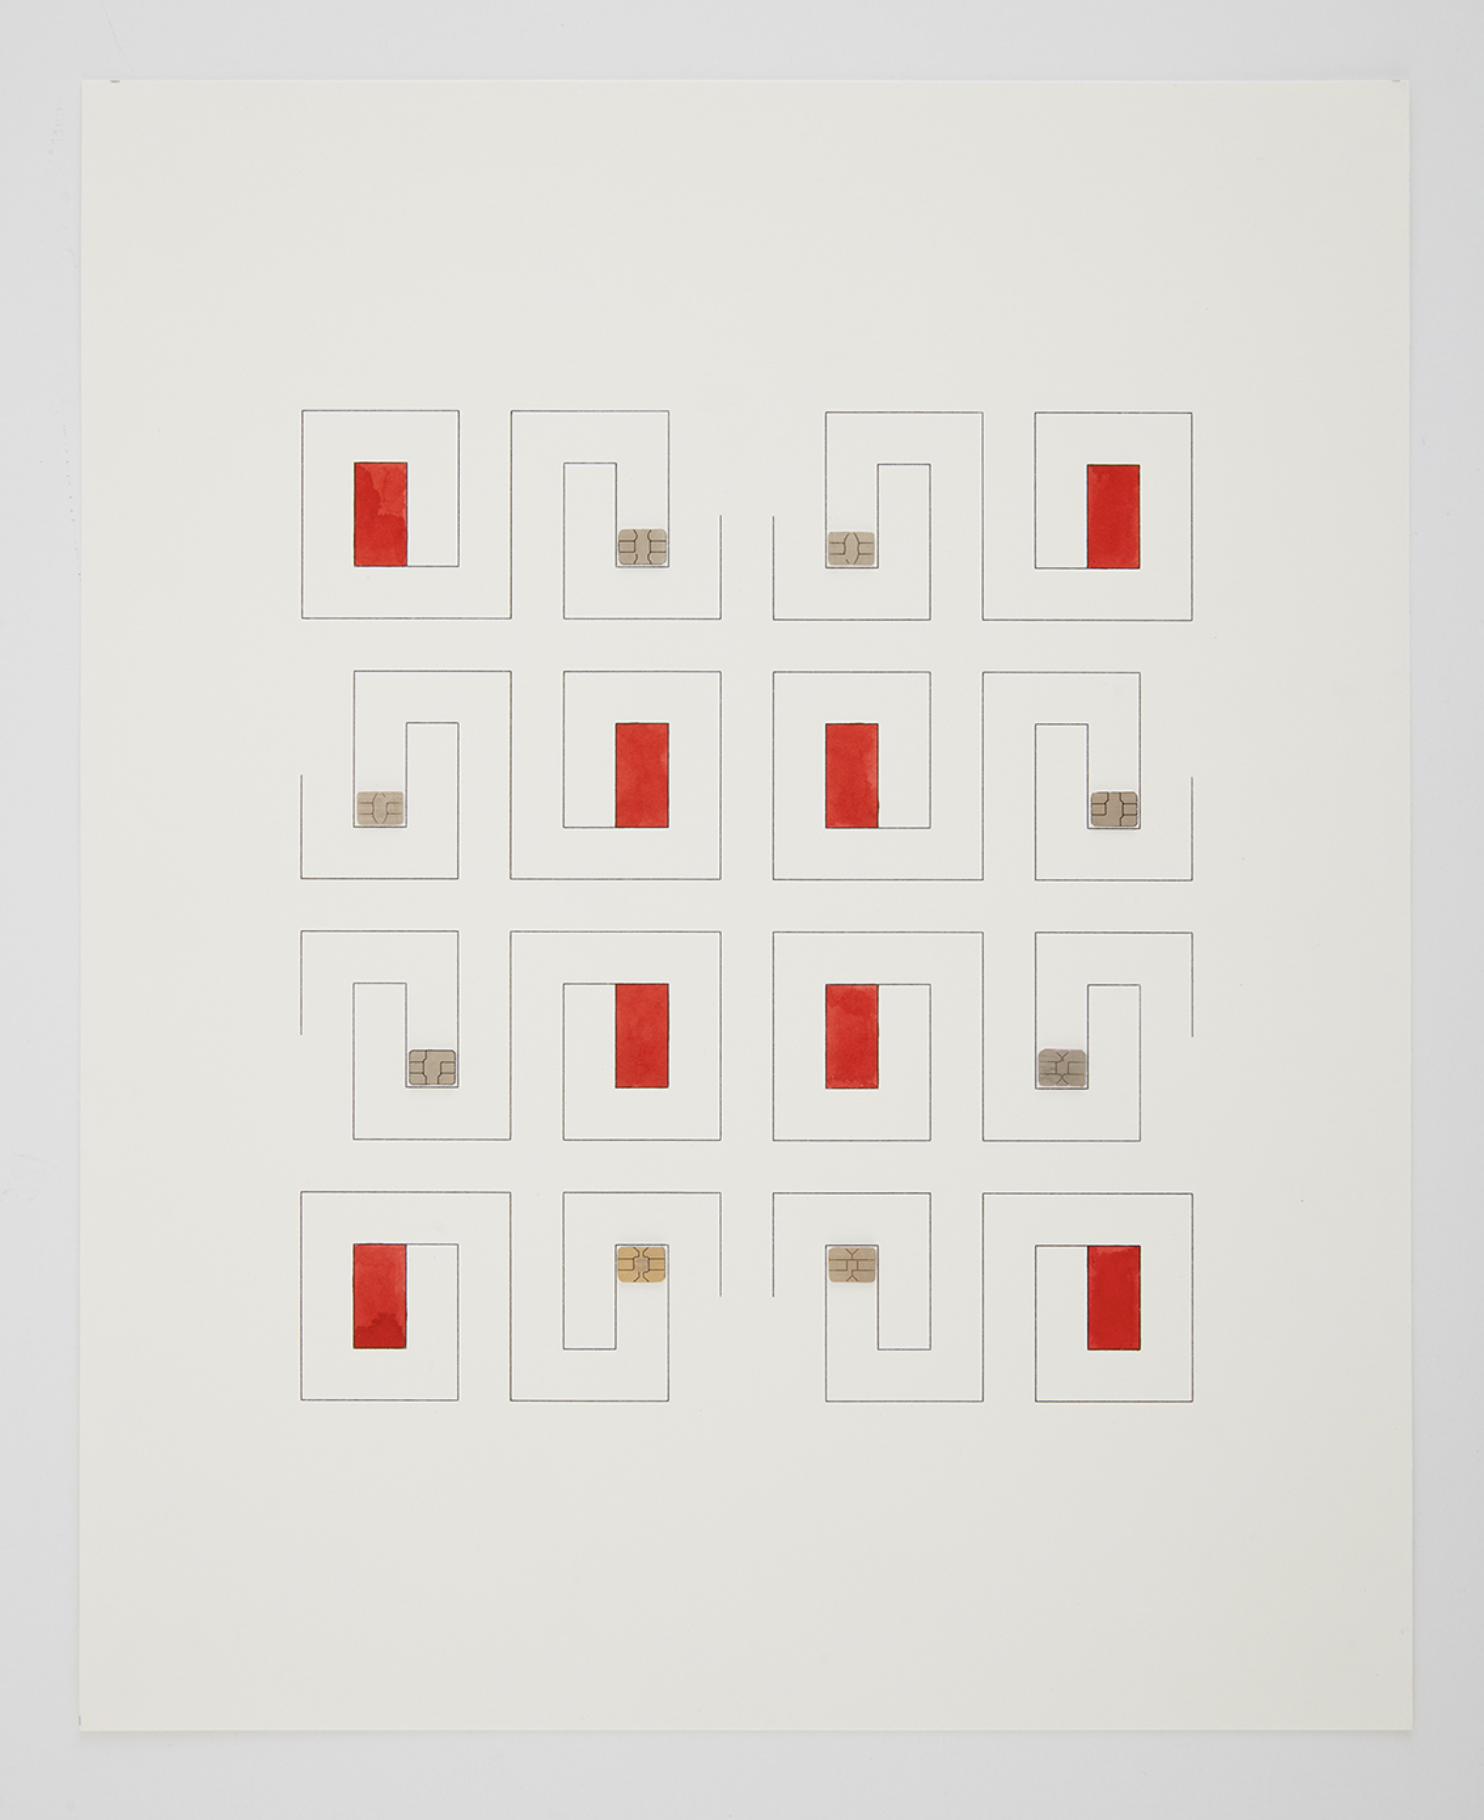 Red rectangles and gray squares in grid